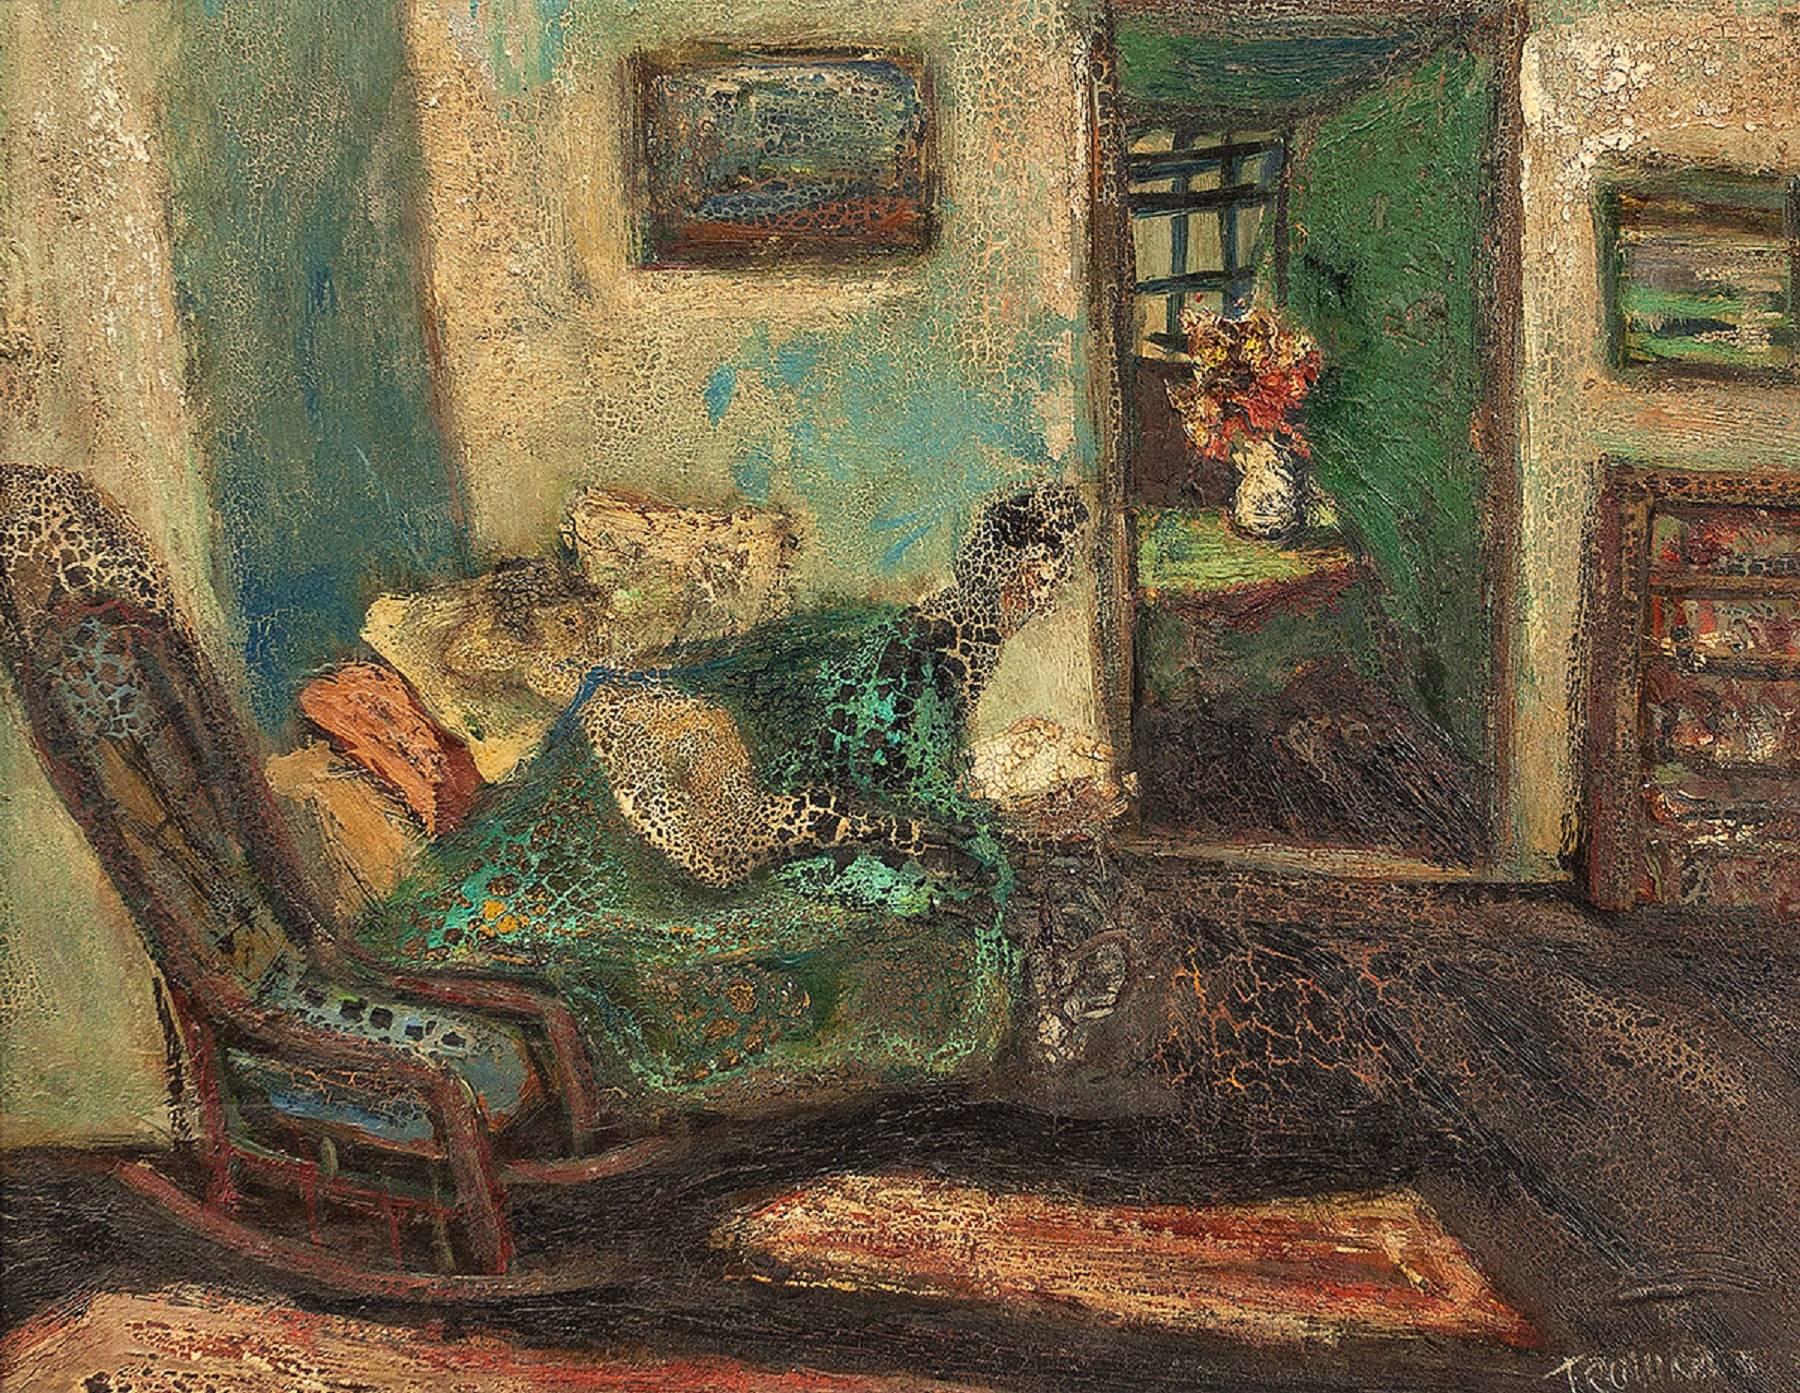 Abstract Interior Scene - Painting by Abram Tromka